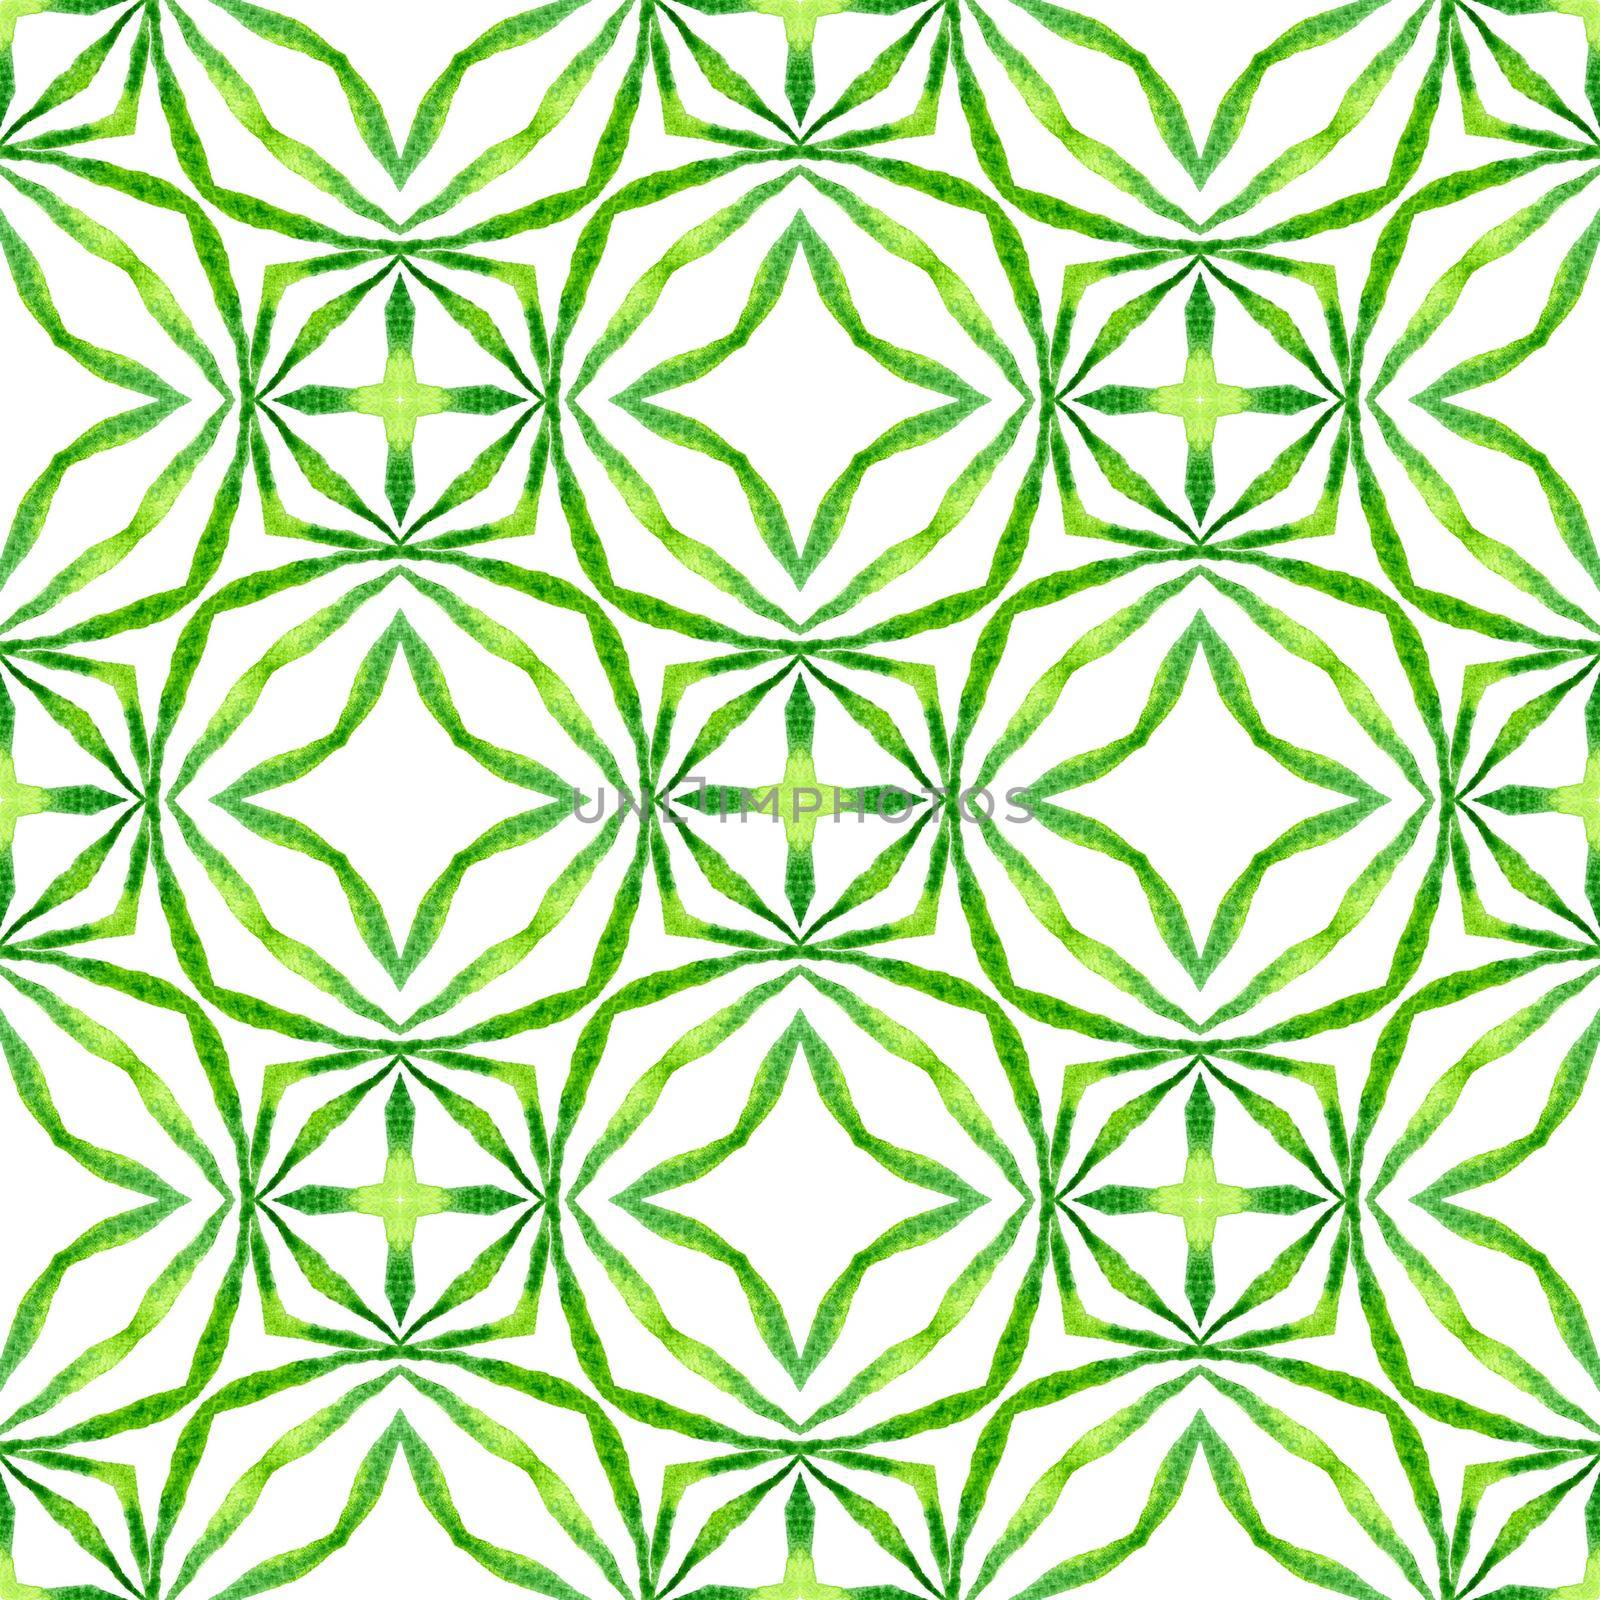 Tiled watercolor background. Green wondrous boho by beginagain